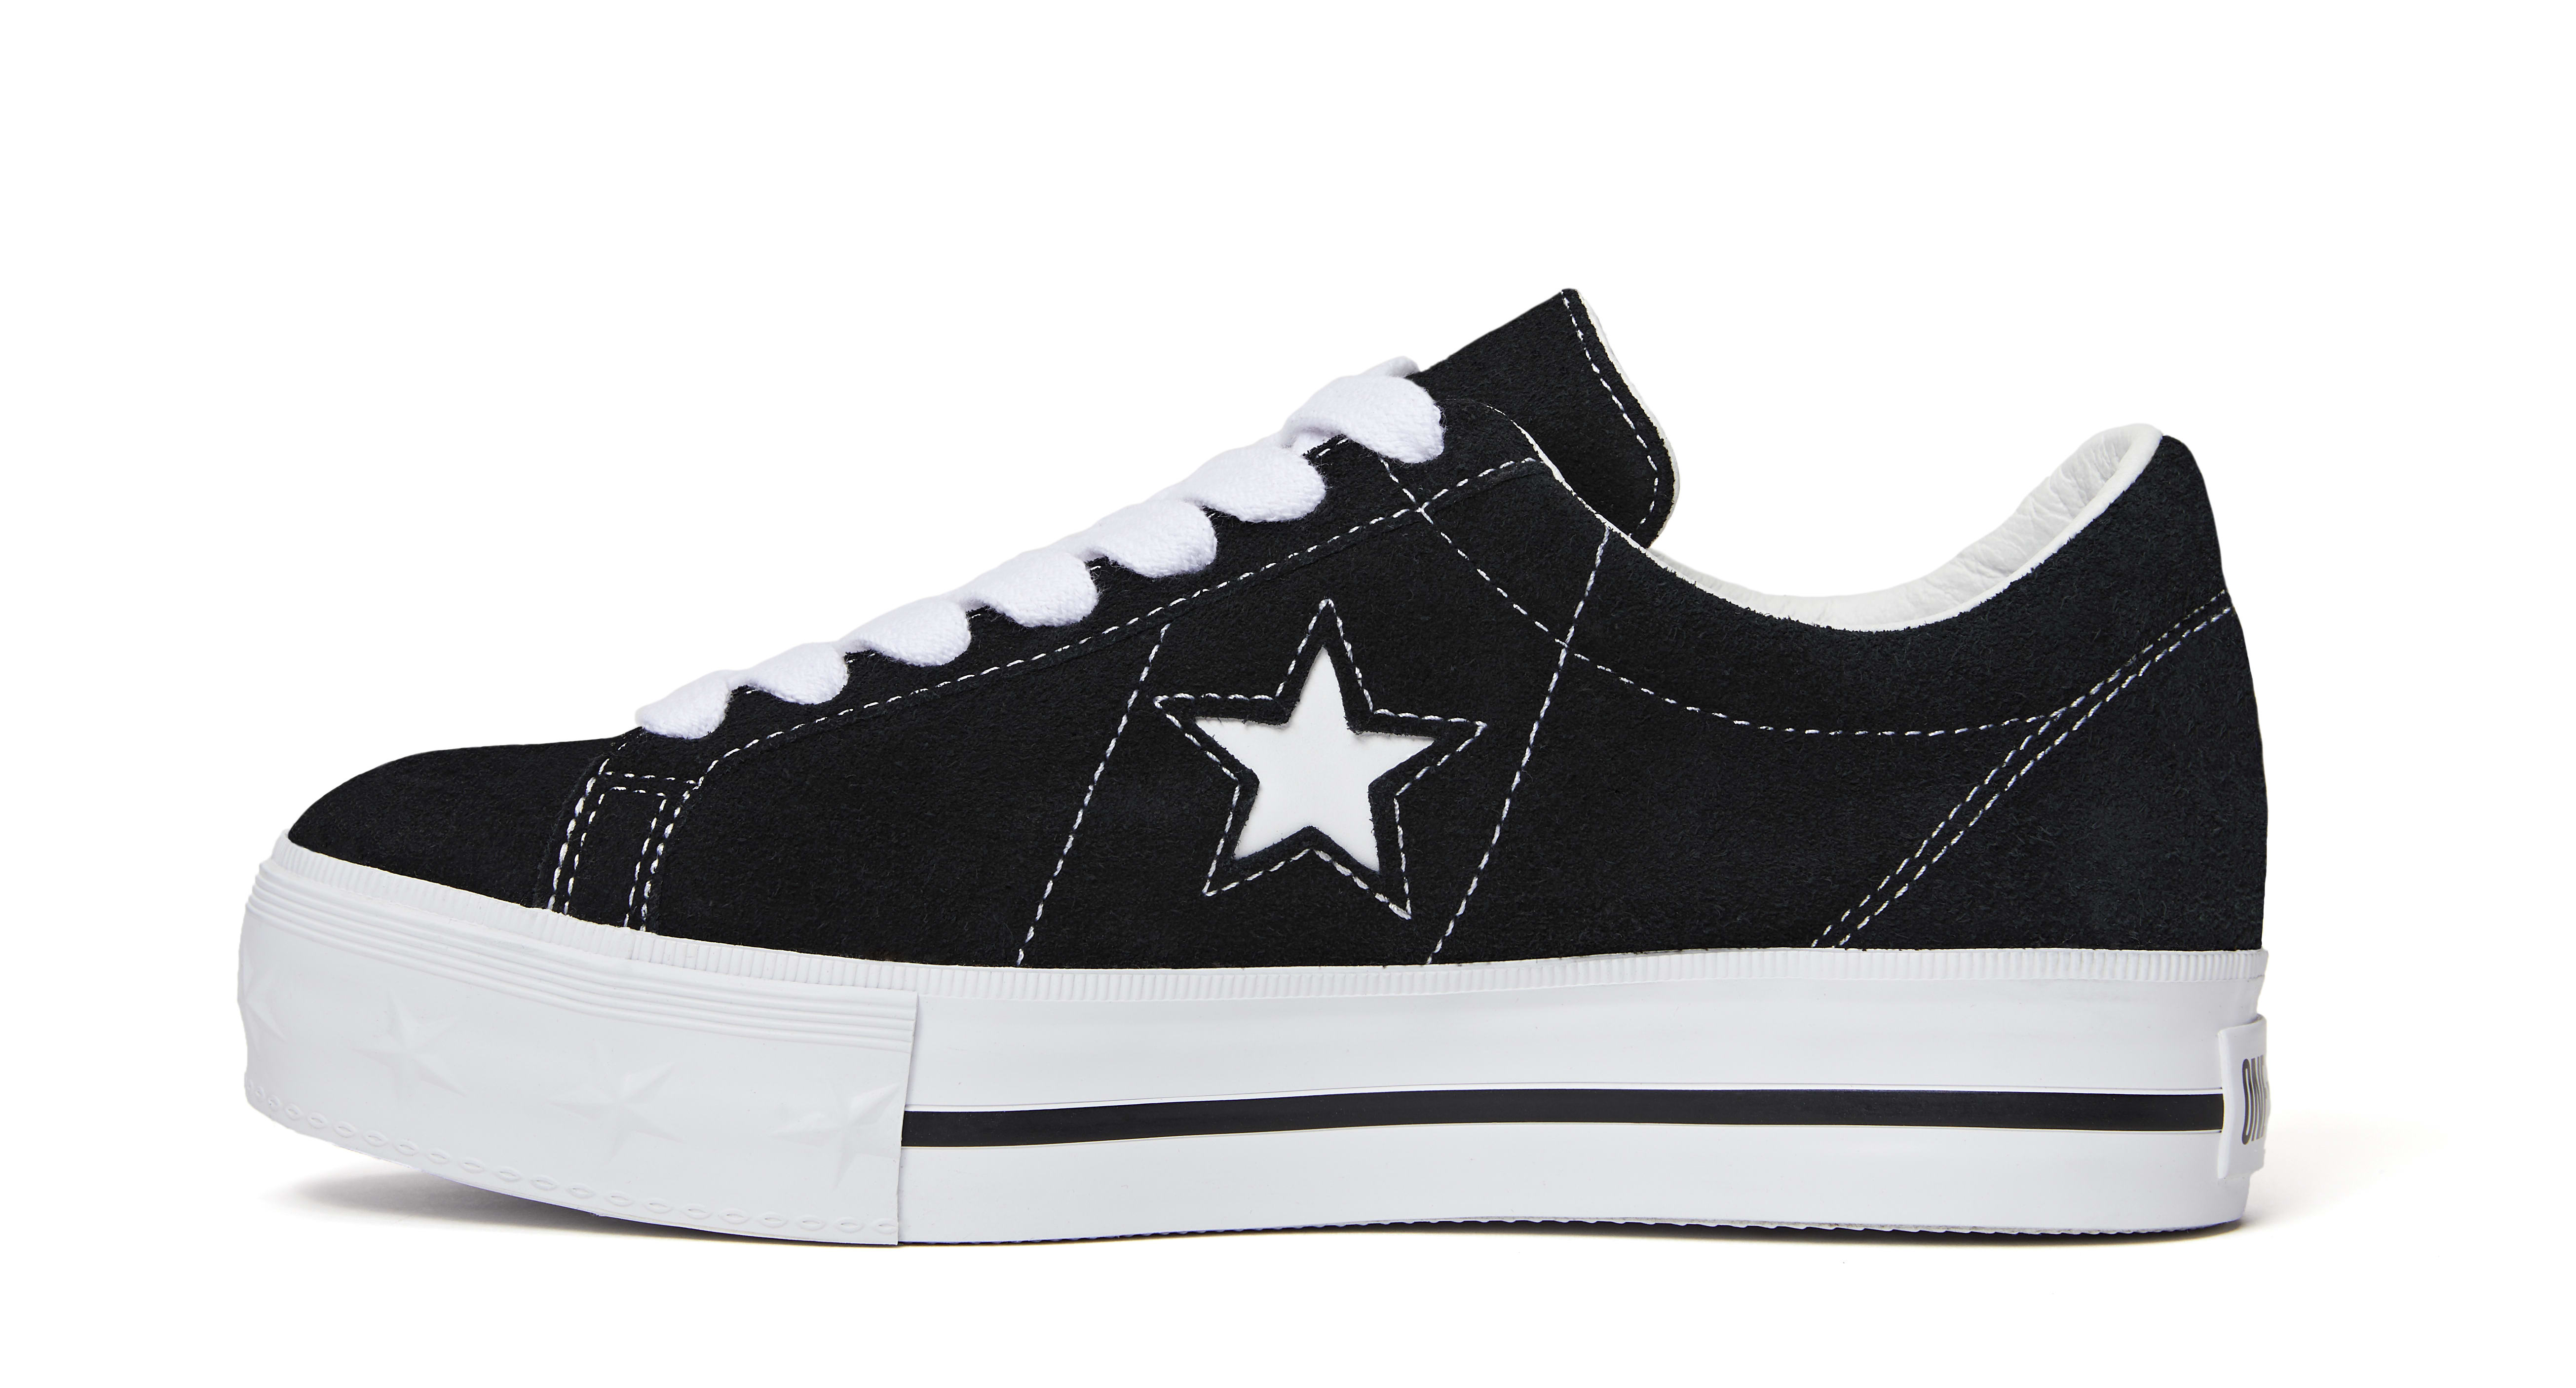 MadeMe x Converse One Star Release Date | Sole Collector